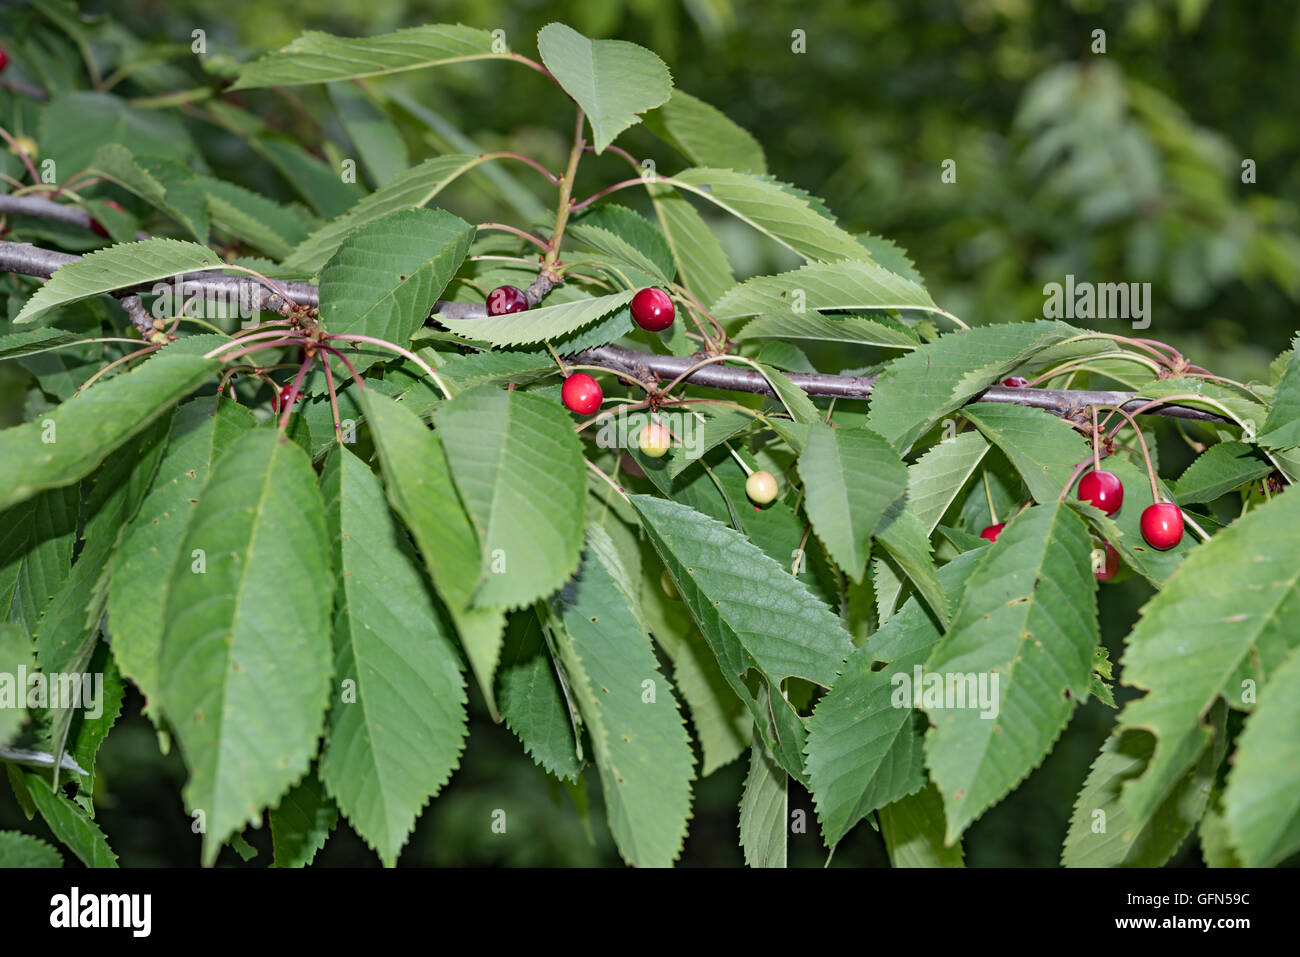 Cerises hanging on a cherry tree branch Banque D'Images